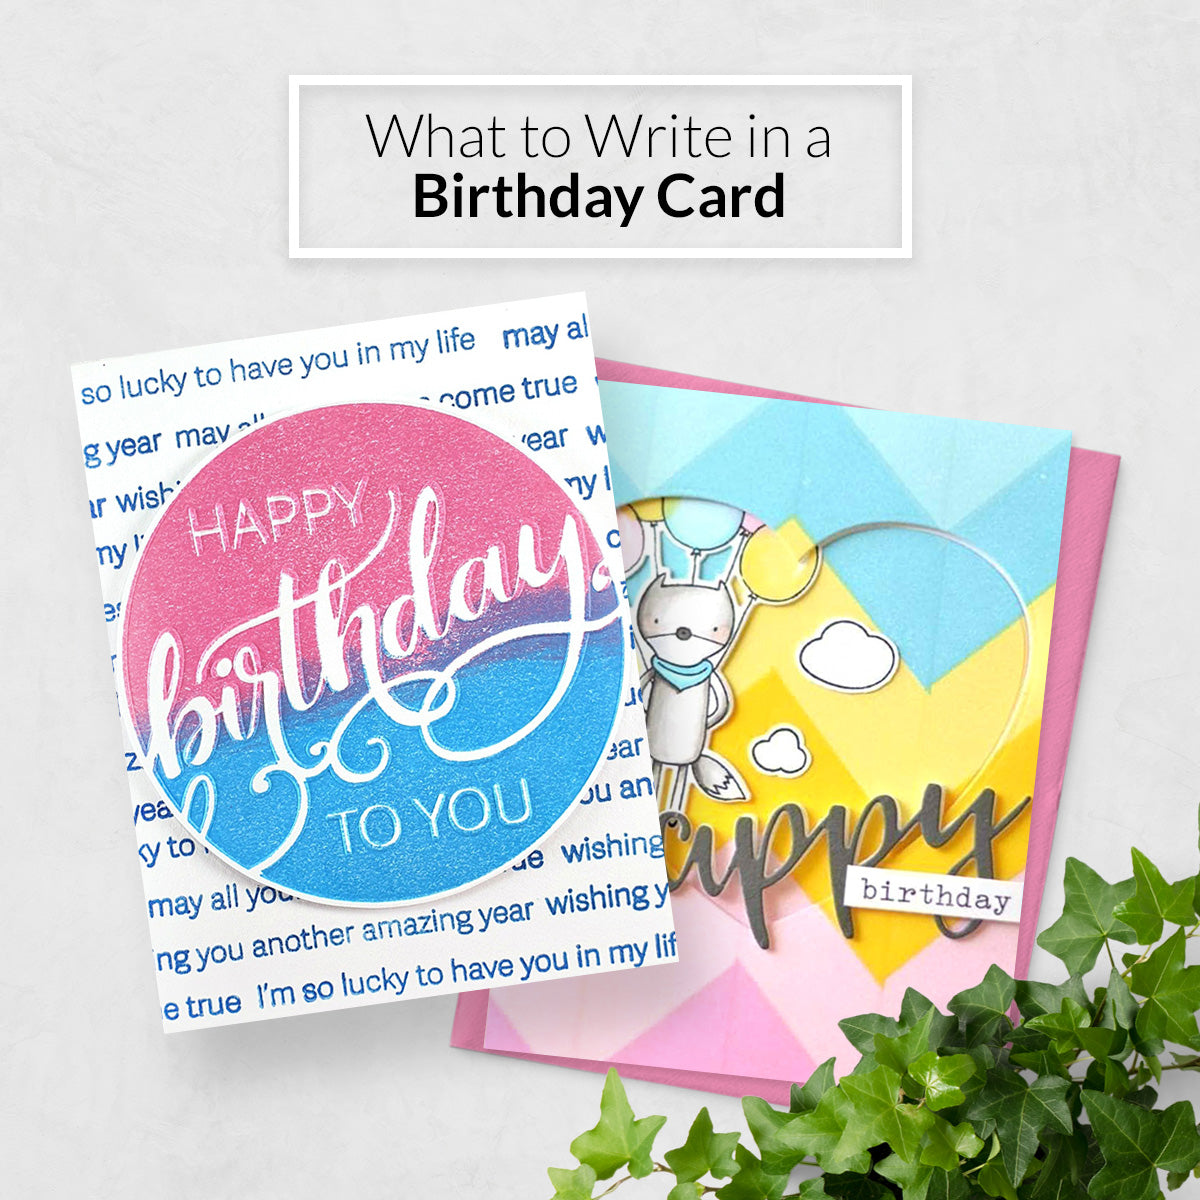 What to Write in a Birthday Card: Unique Birthday Card Messages & Wishes